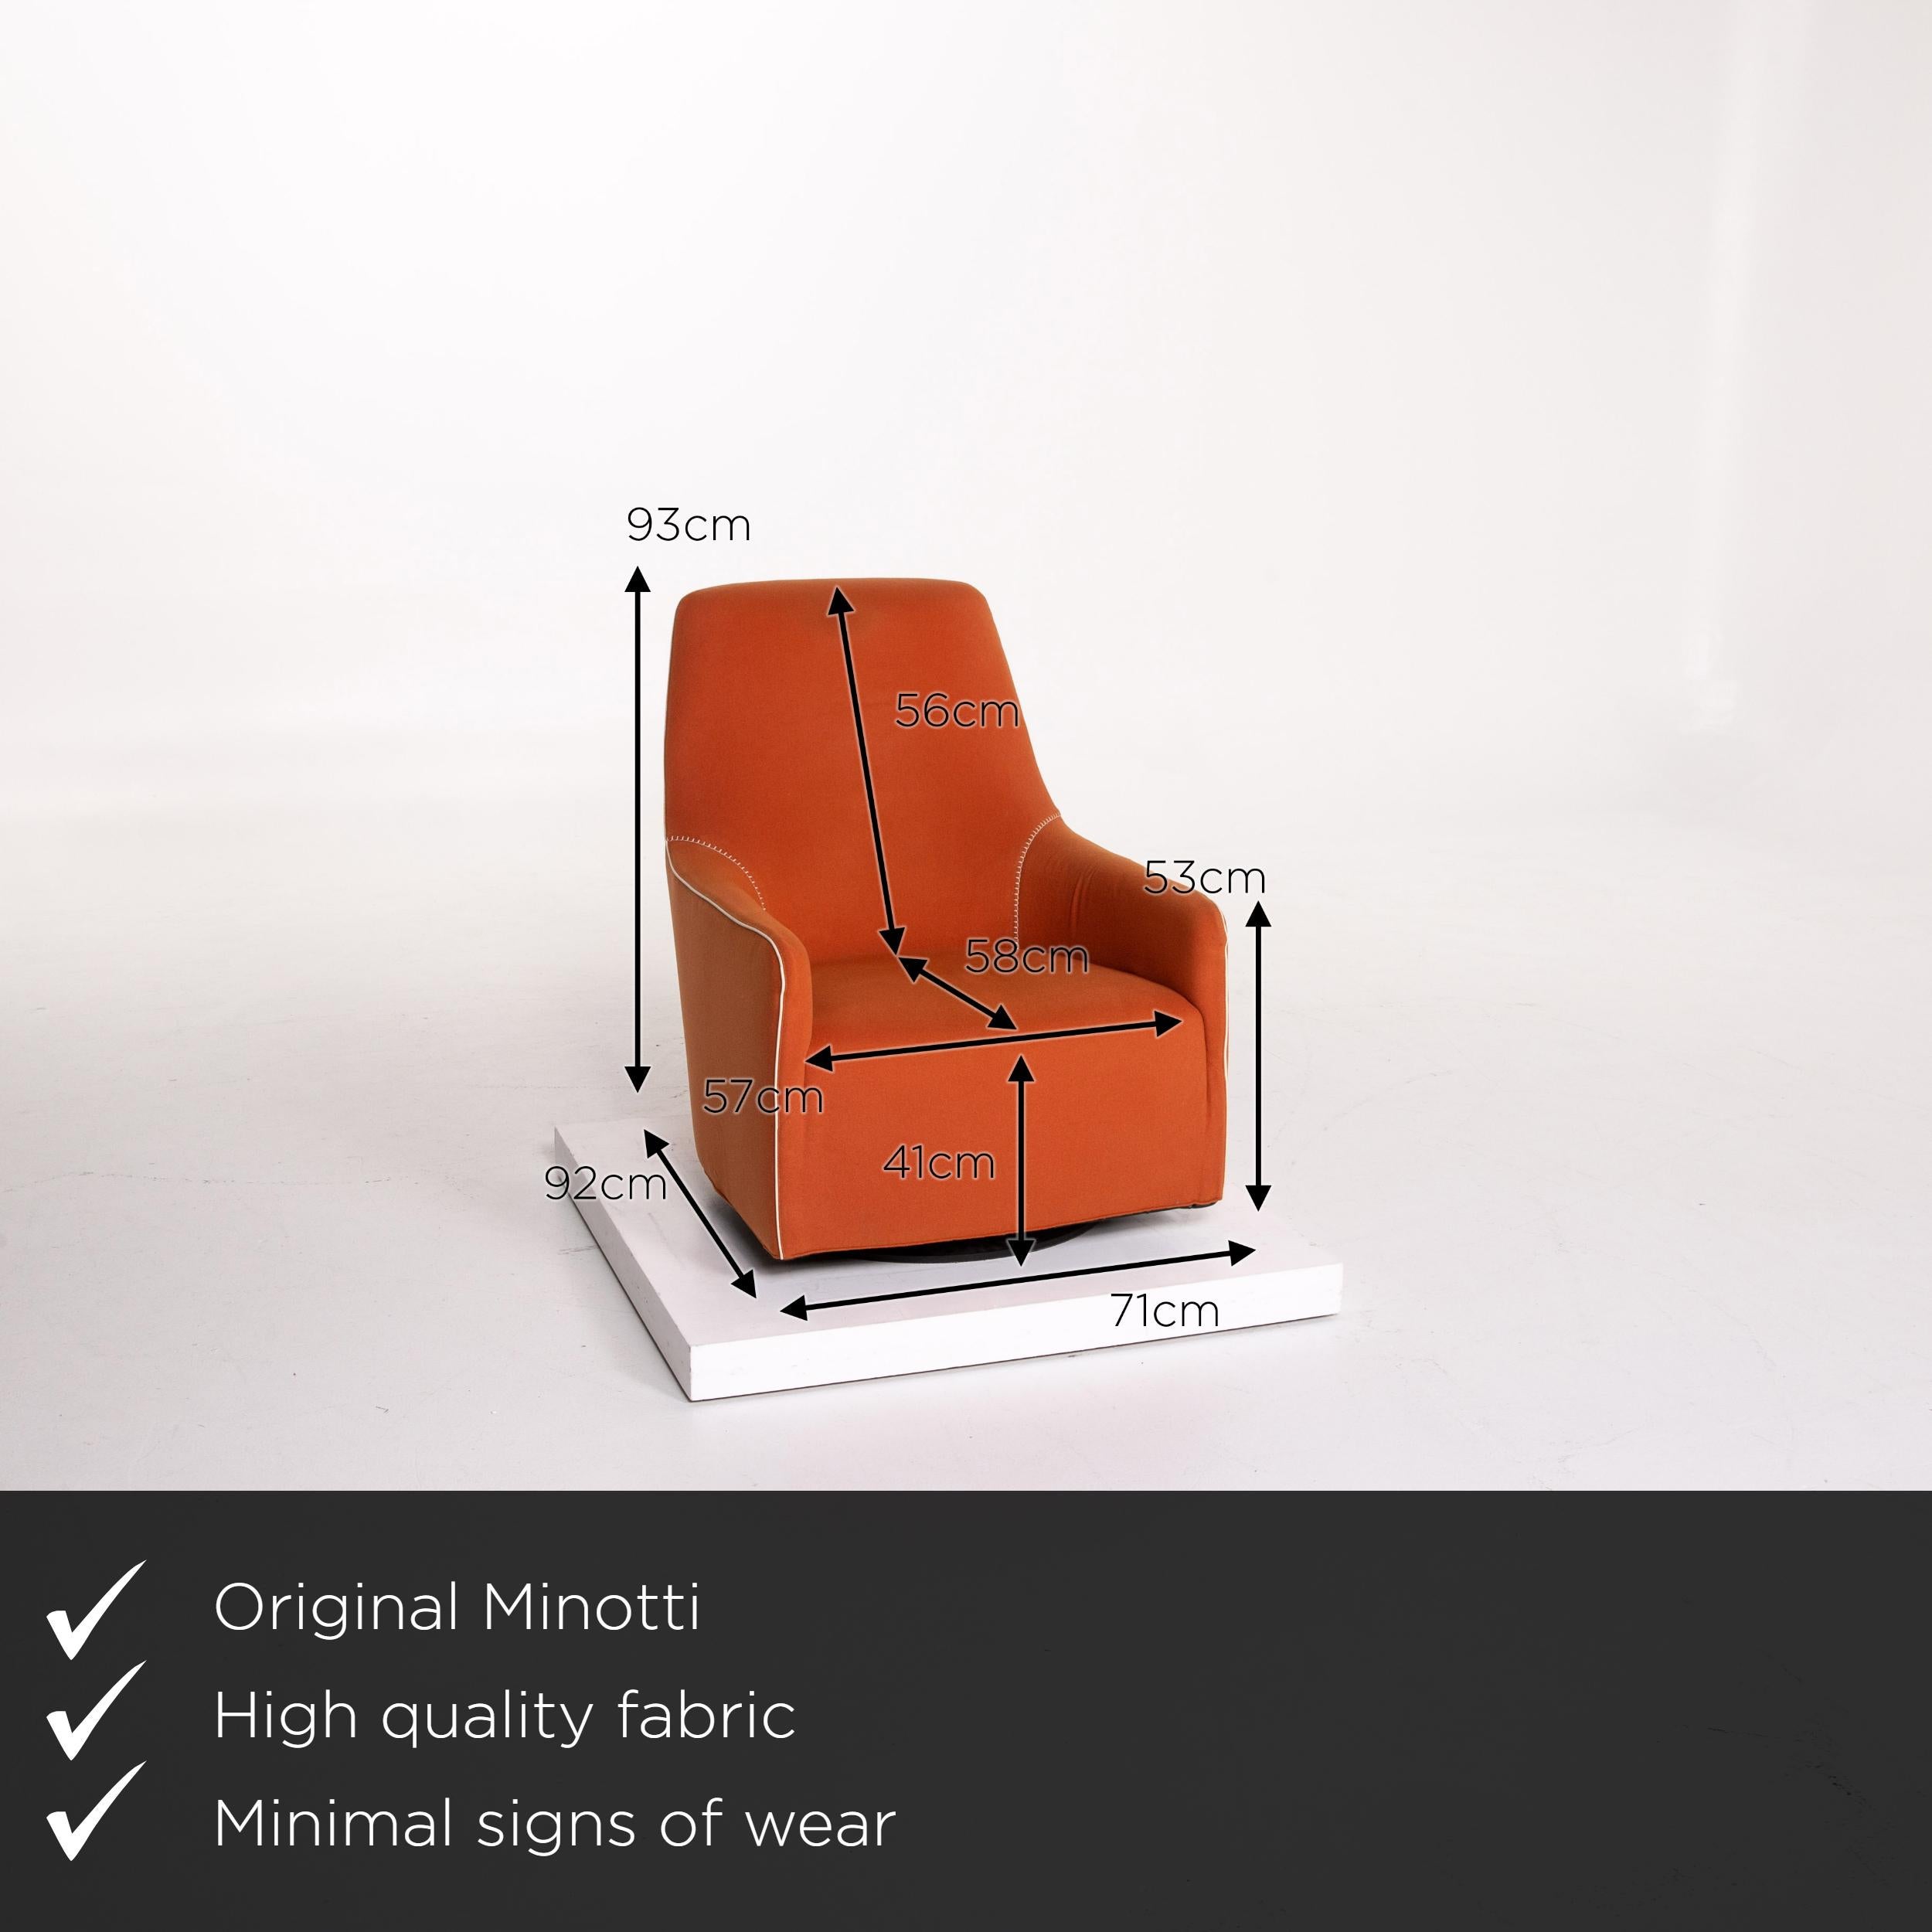 We present to you a Minotti Portofino leather armchair includes stool orange.
 

 Product measurements in centimeters:
 

Depth 92
Width 71
Height 93
Seat height 41
Rest height 53
Seat depth 58
Seat width 57
Back height 56.
   